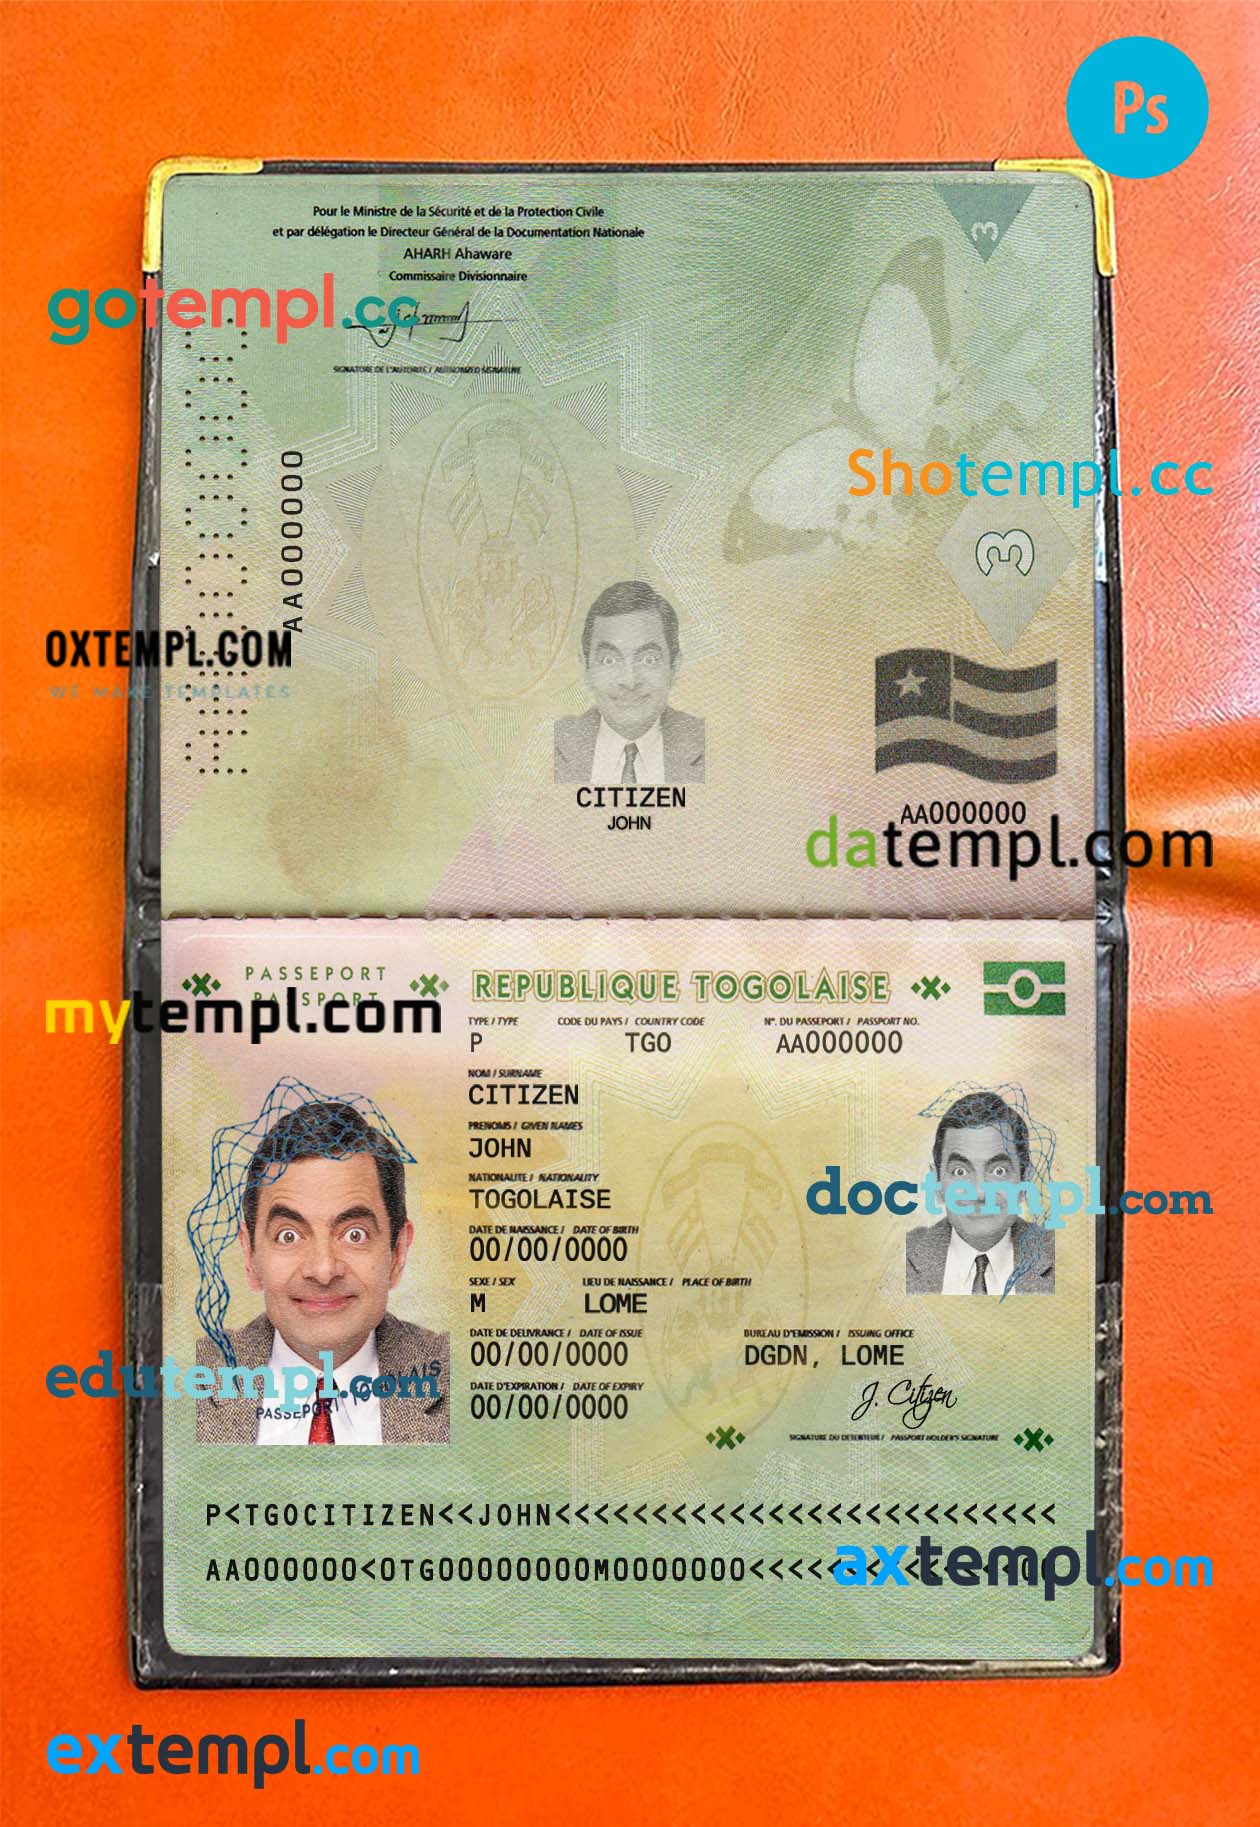 Togo passport psd files, editable scan and snapshot sample, 2 in 1